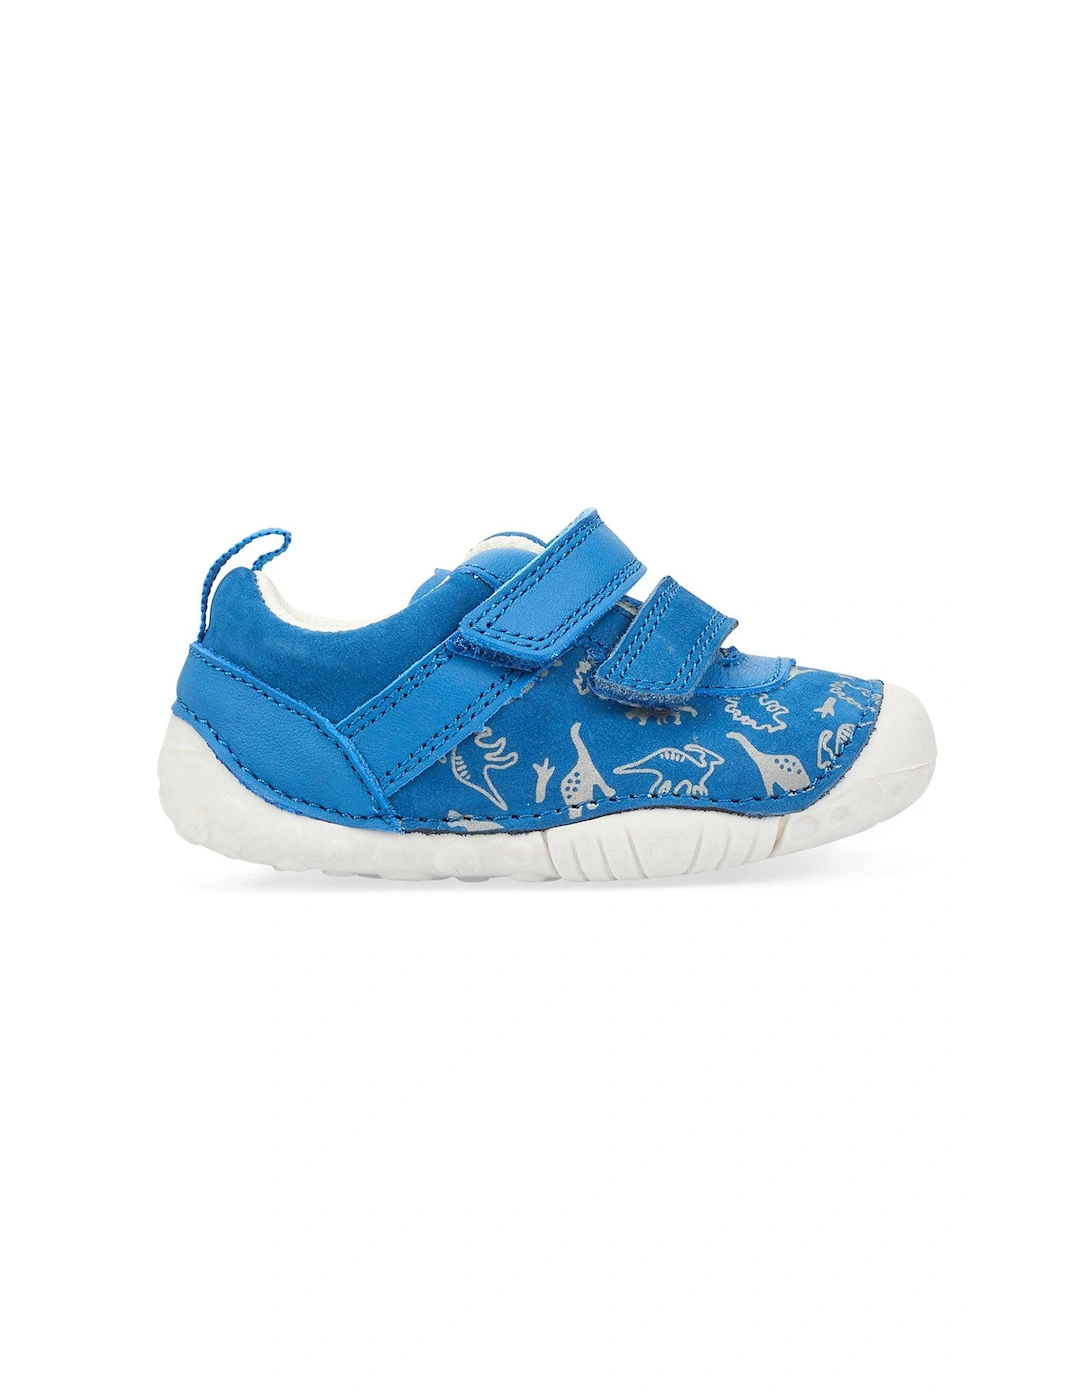 Roar Suede Leather Dinosaur Print Easy Riptape Baby Shoes - Blue, 2 of 1